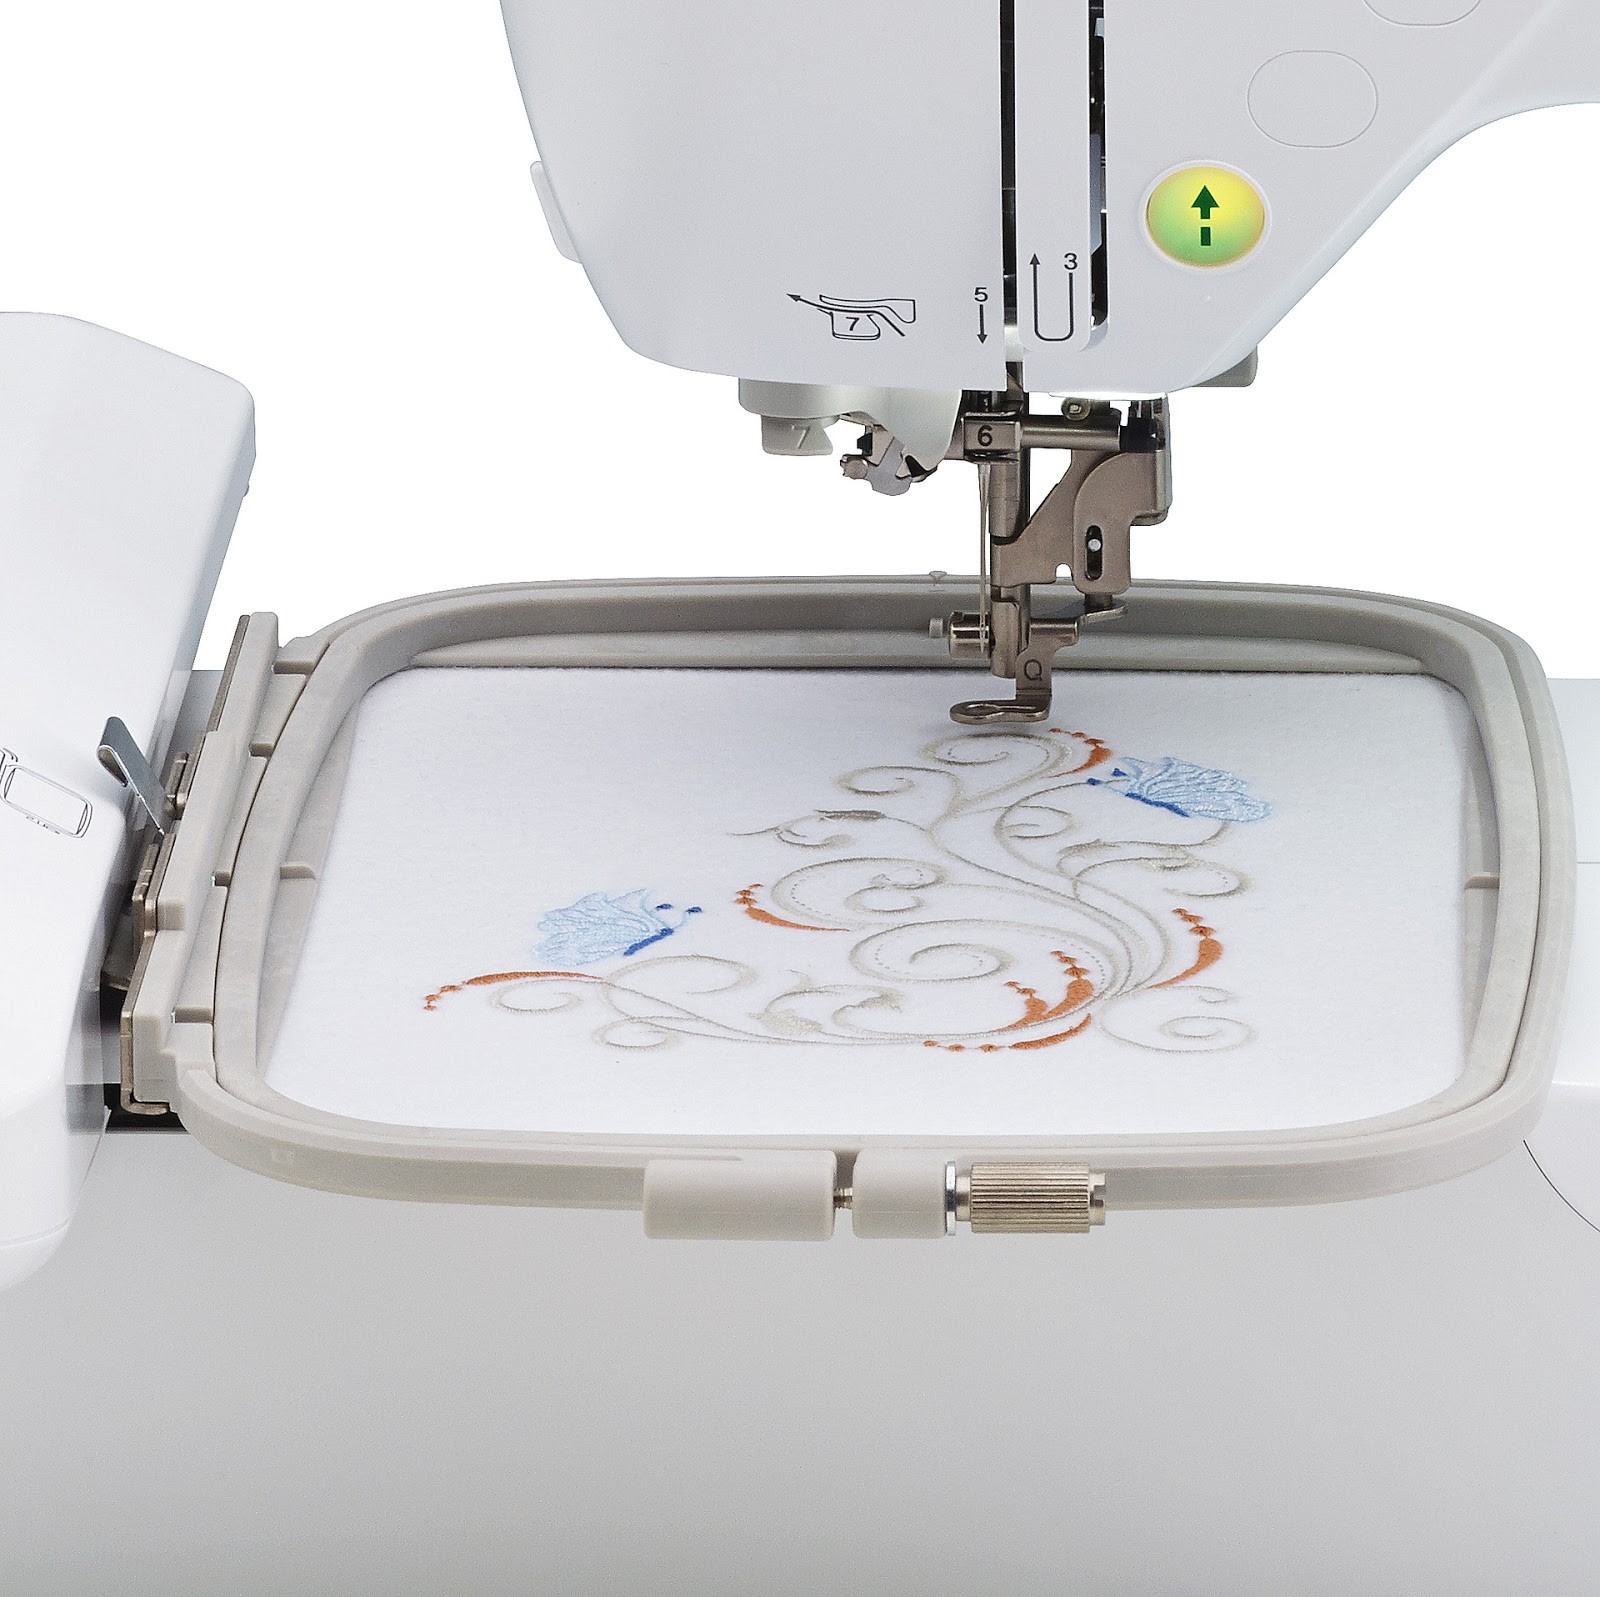 brother pe800 embroidery machine